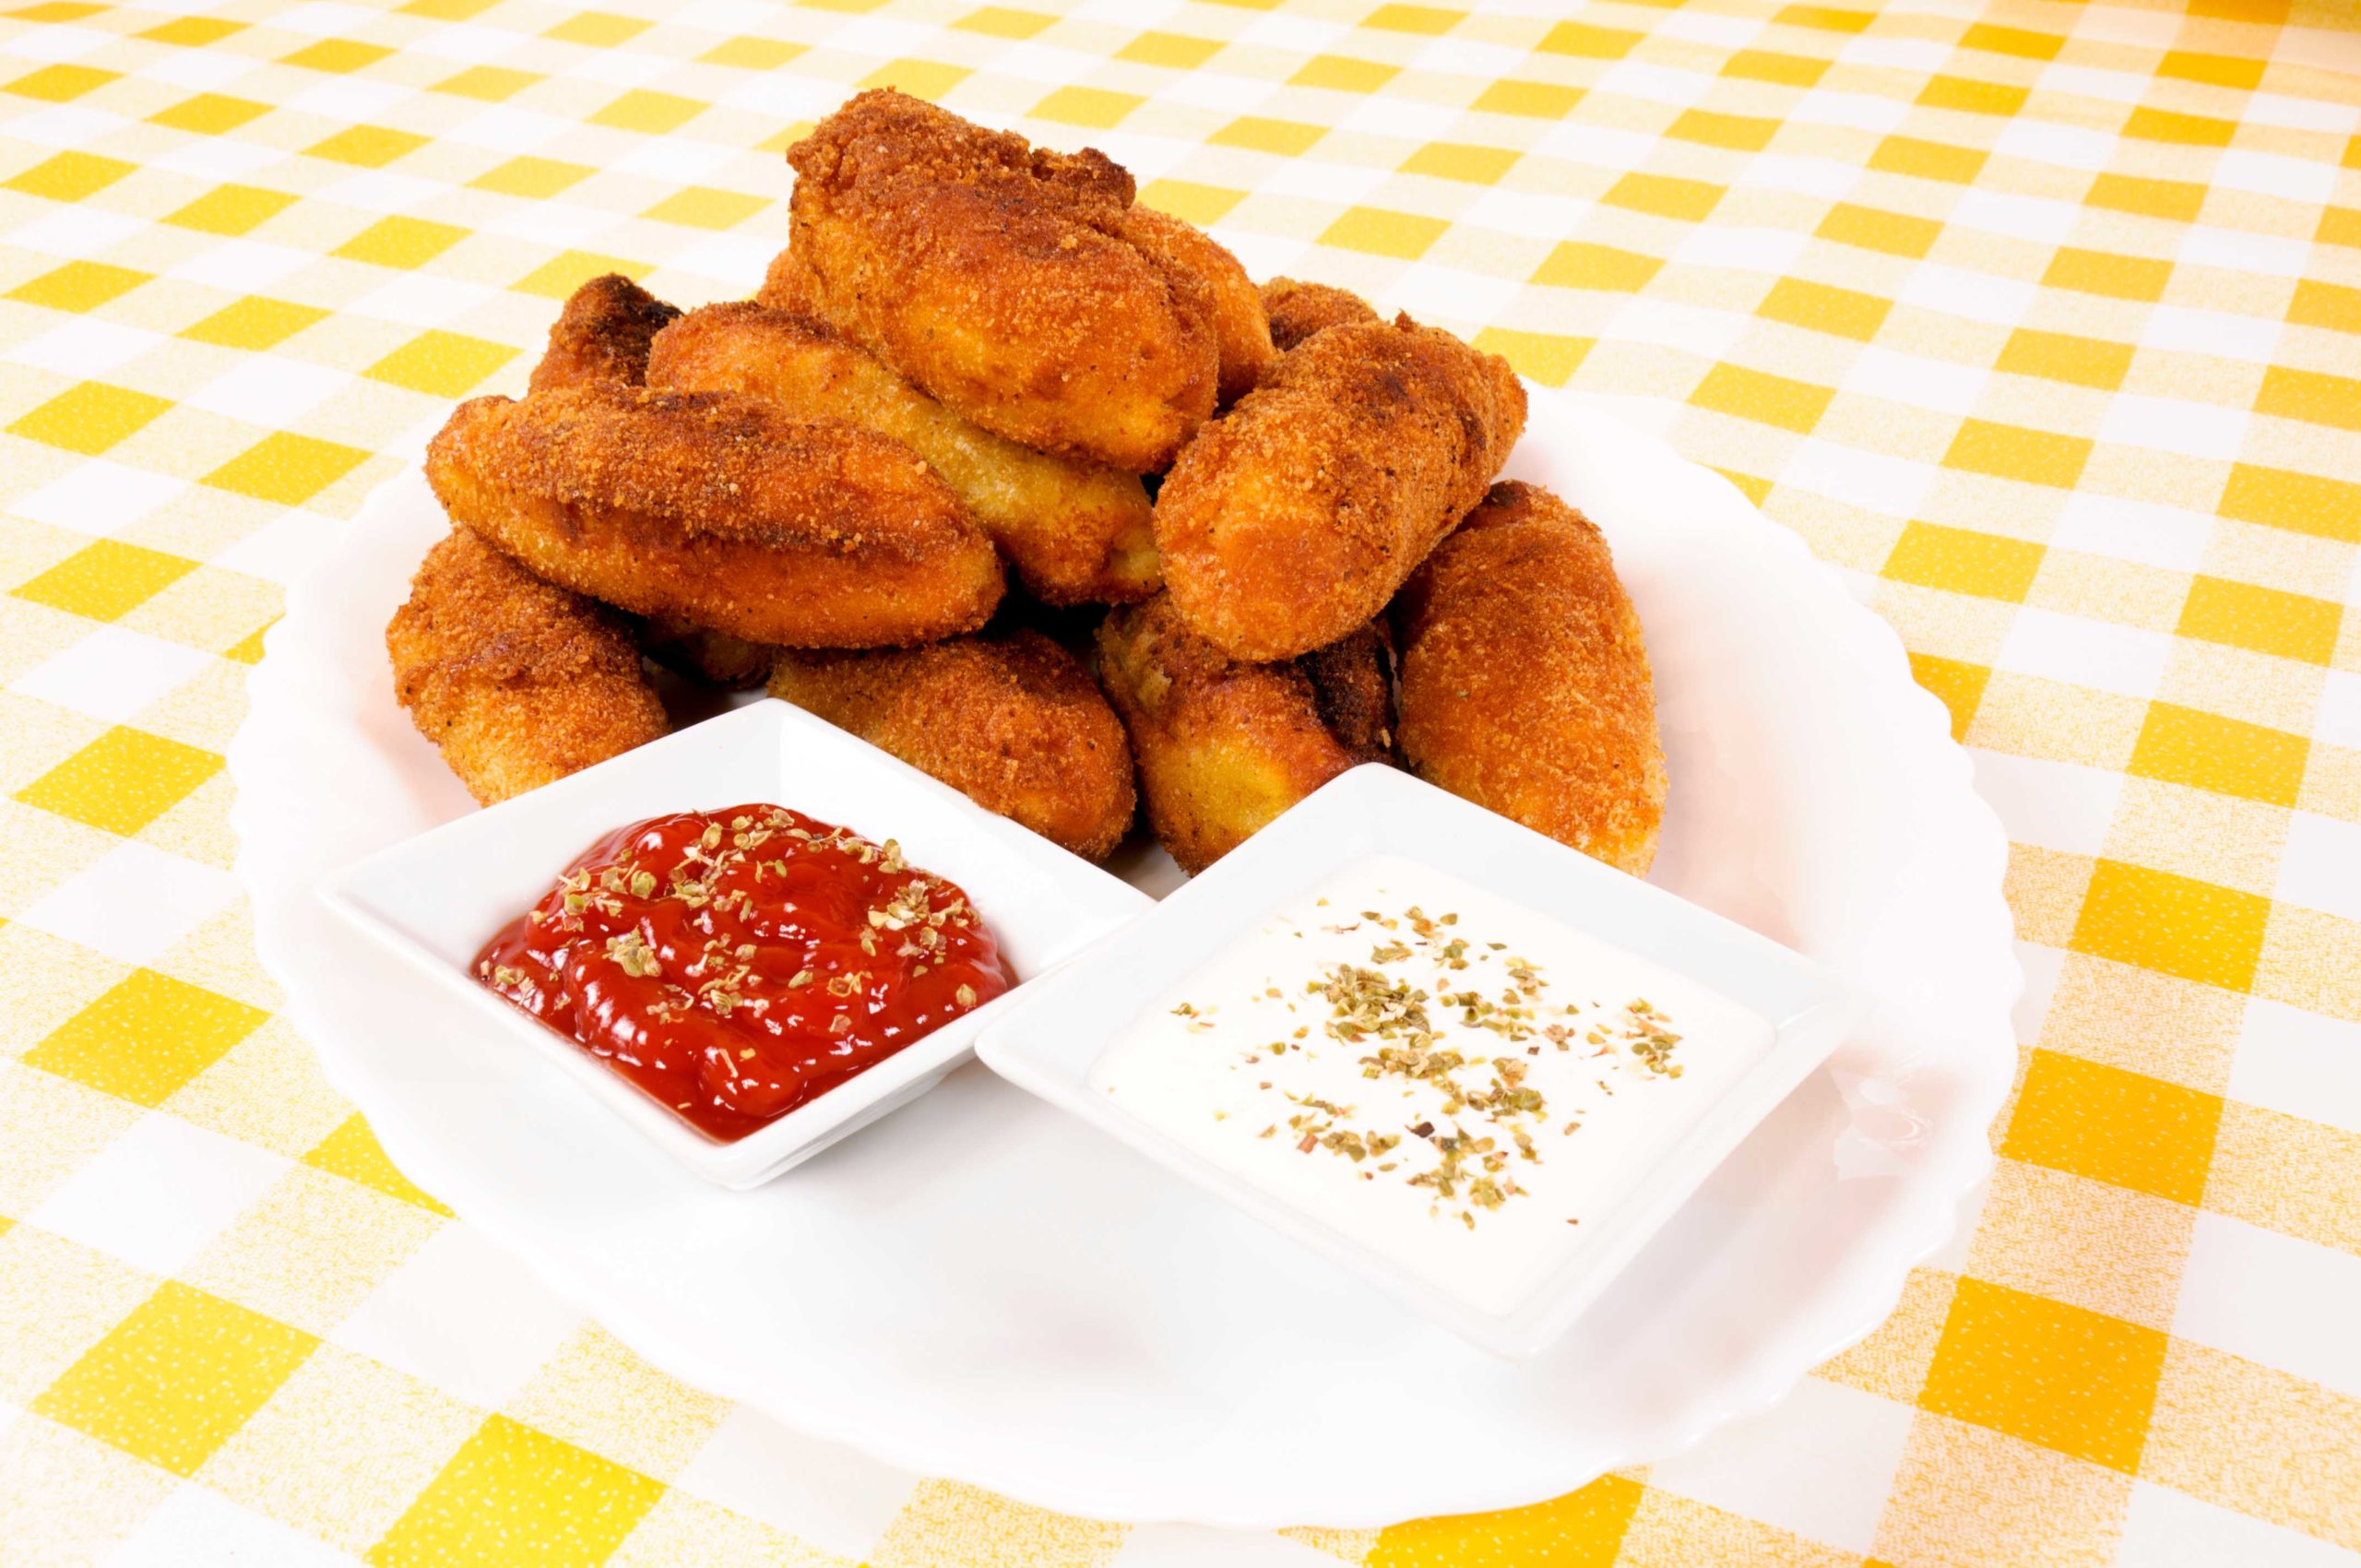 Fried foods on a table with sauces